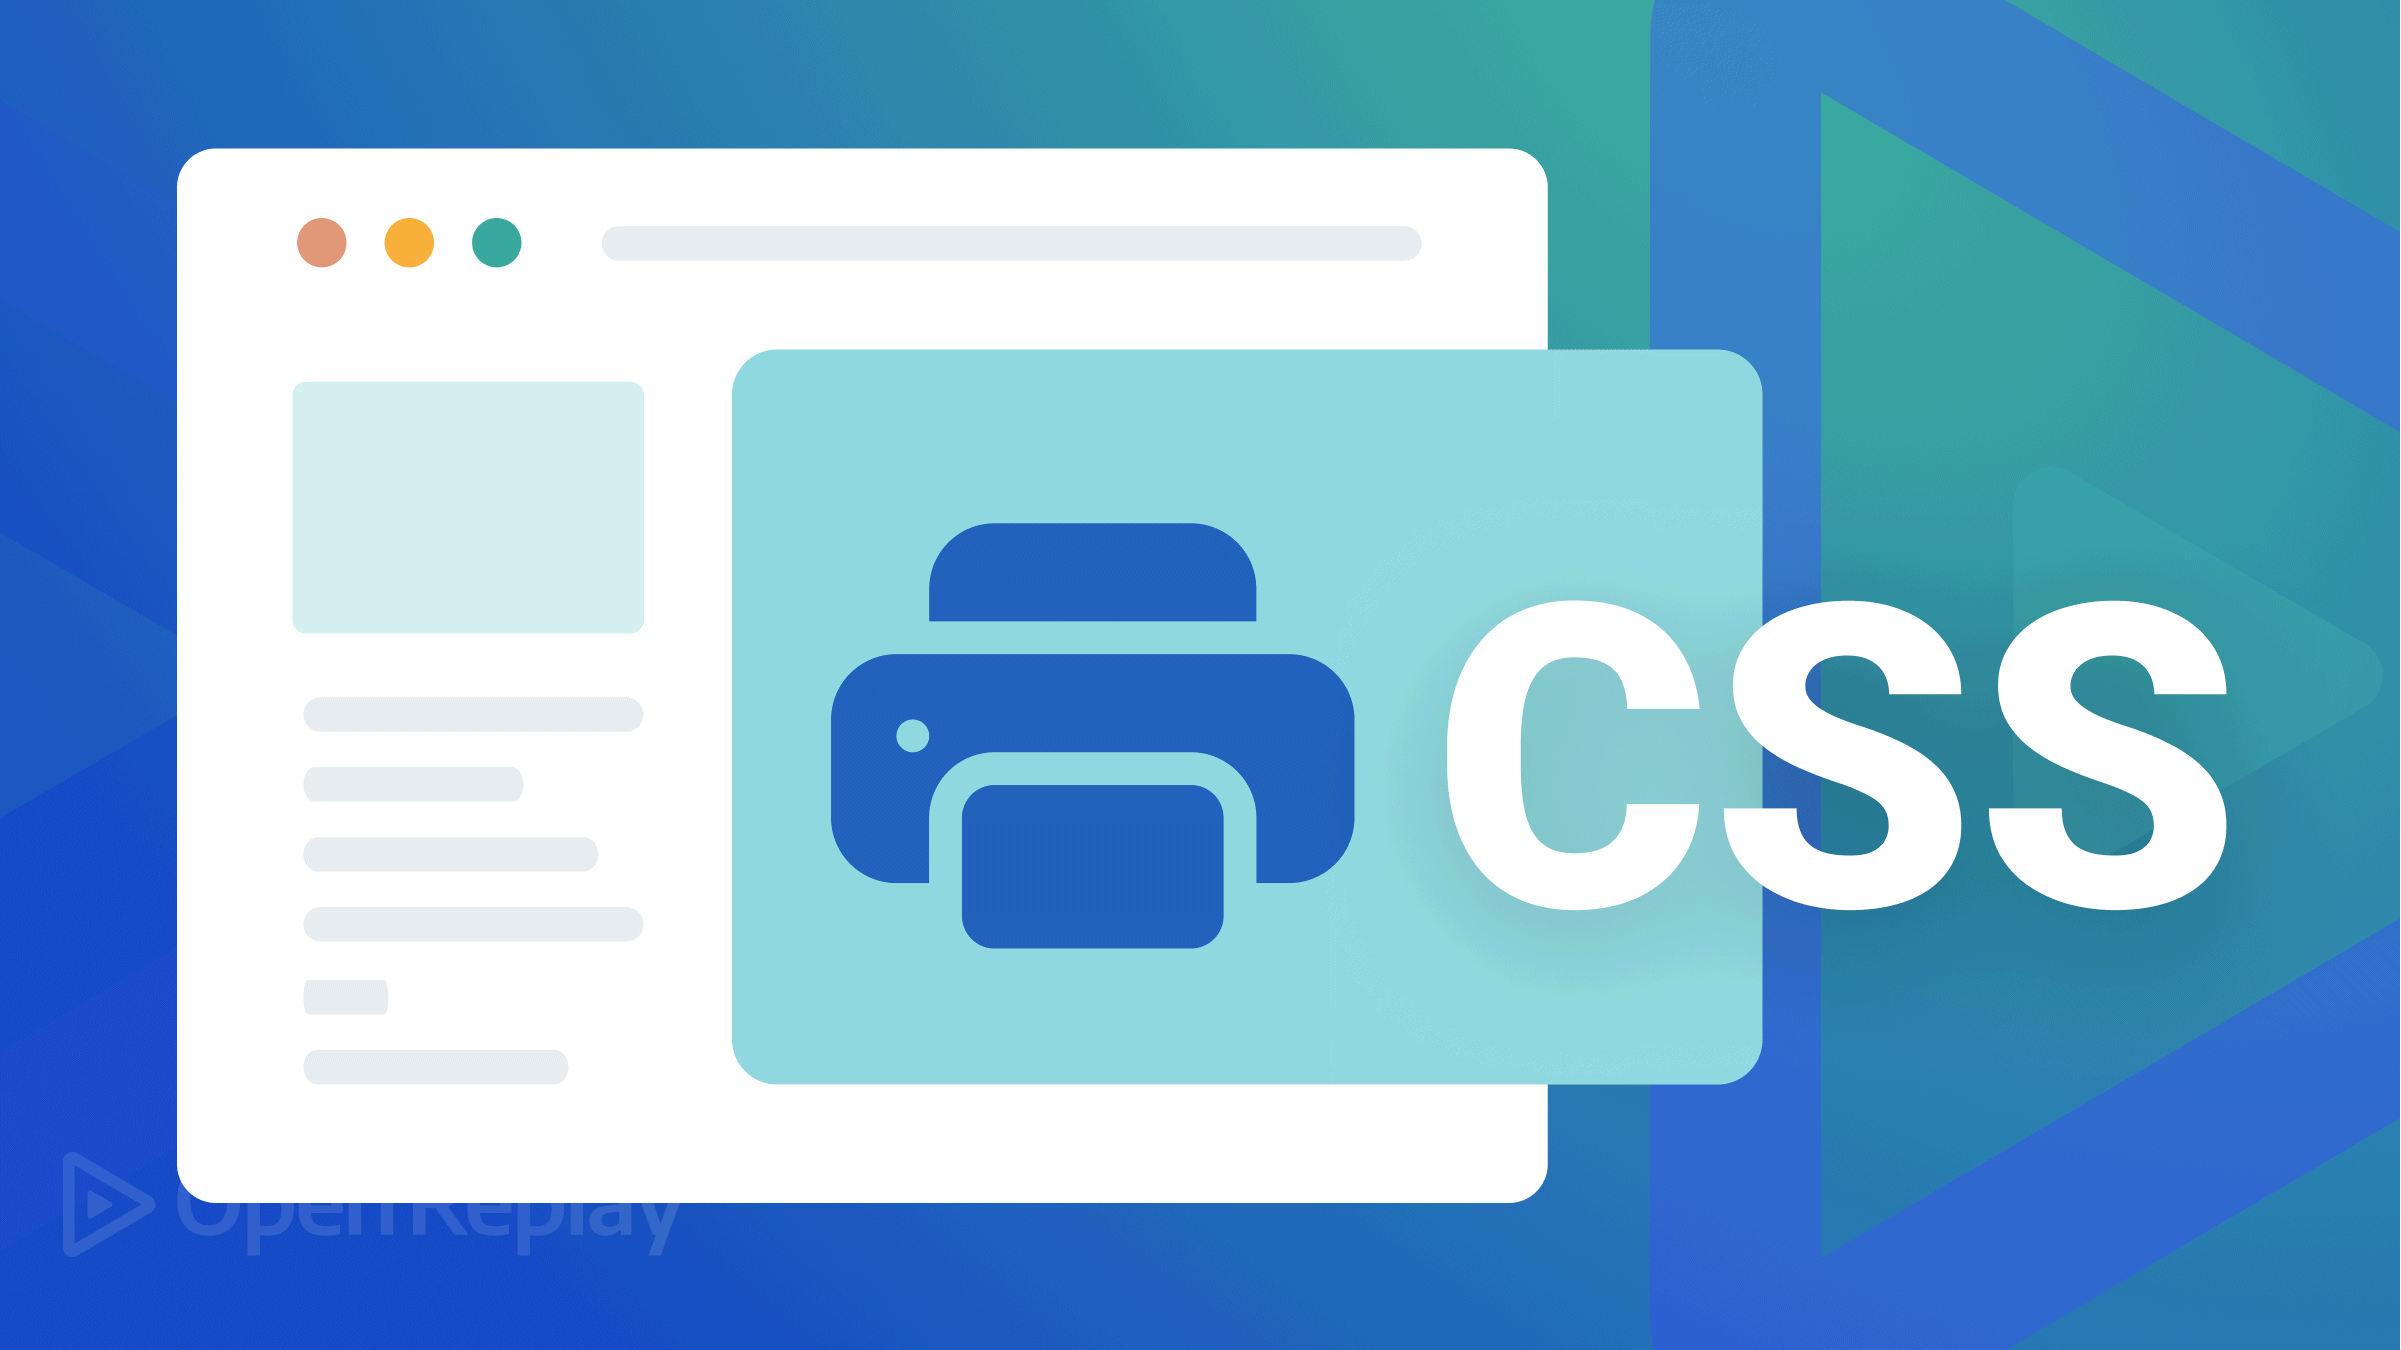 Making your Web Pages Printer-Friendly with CSS